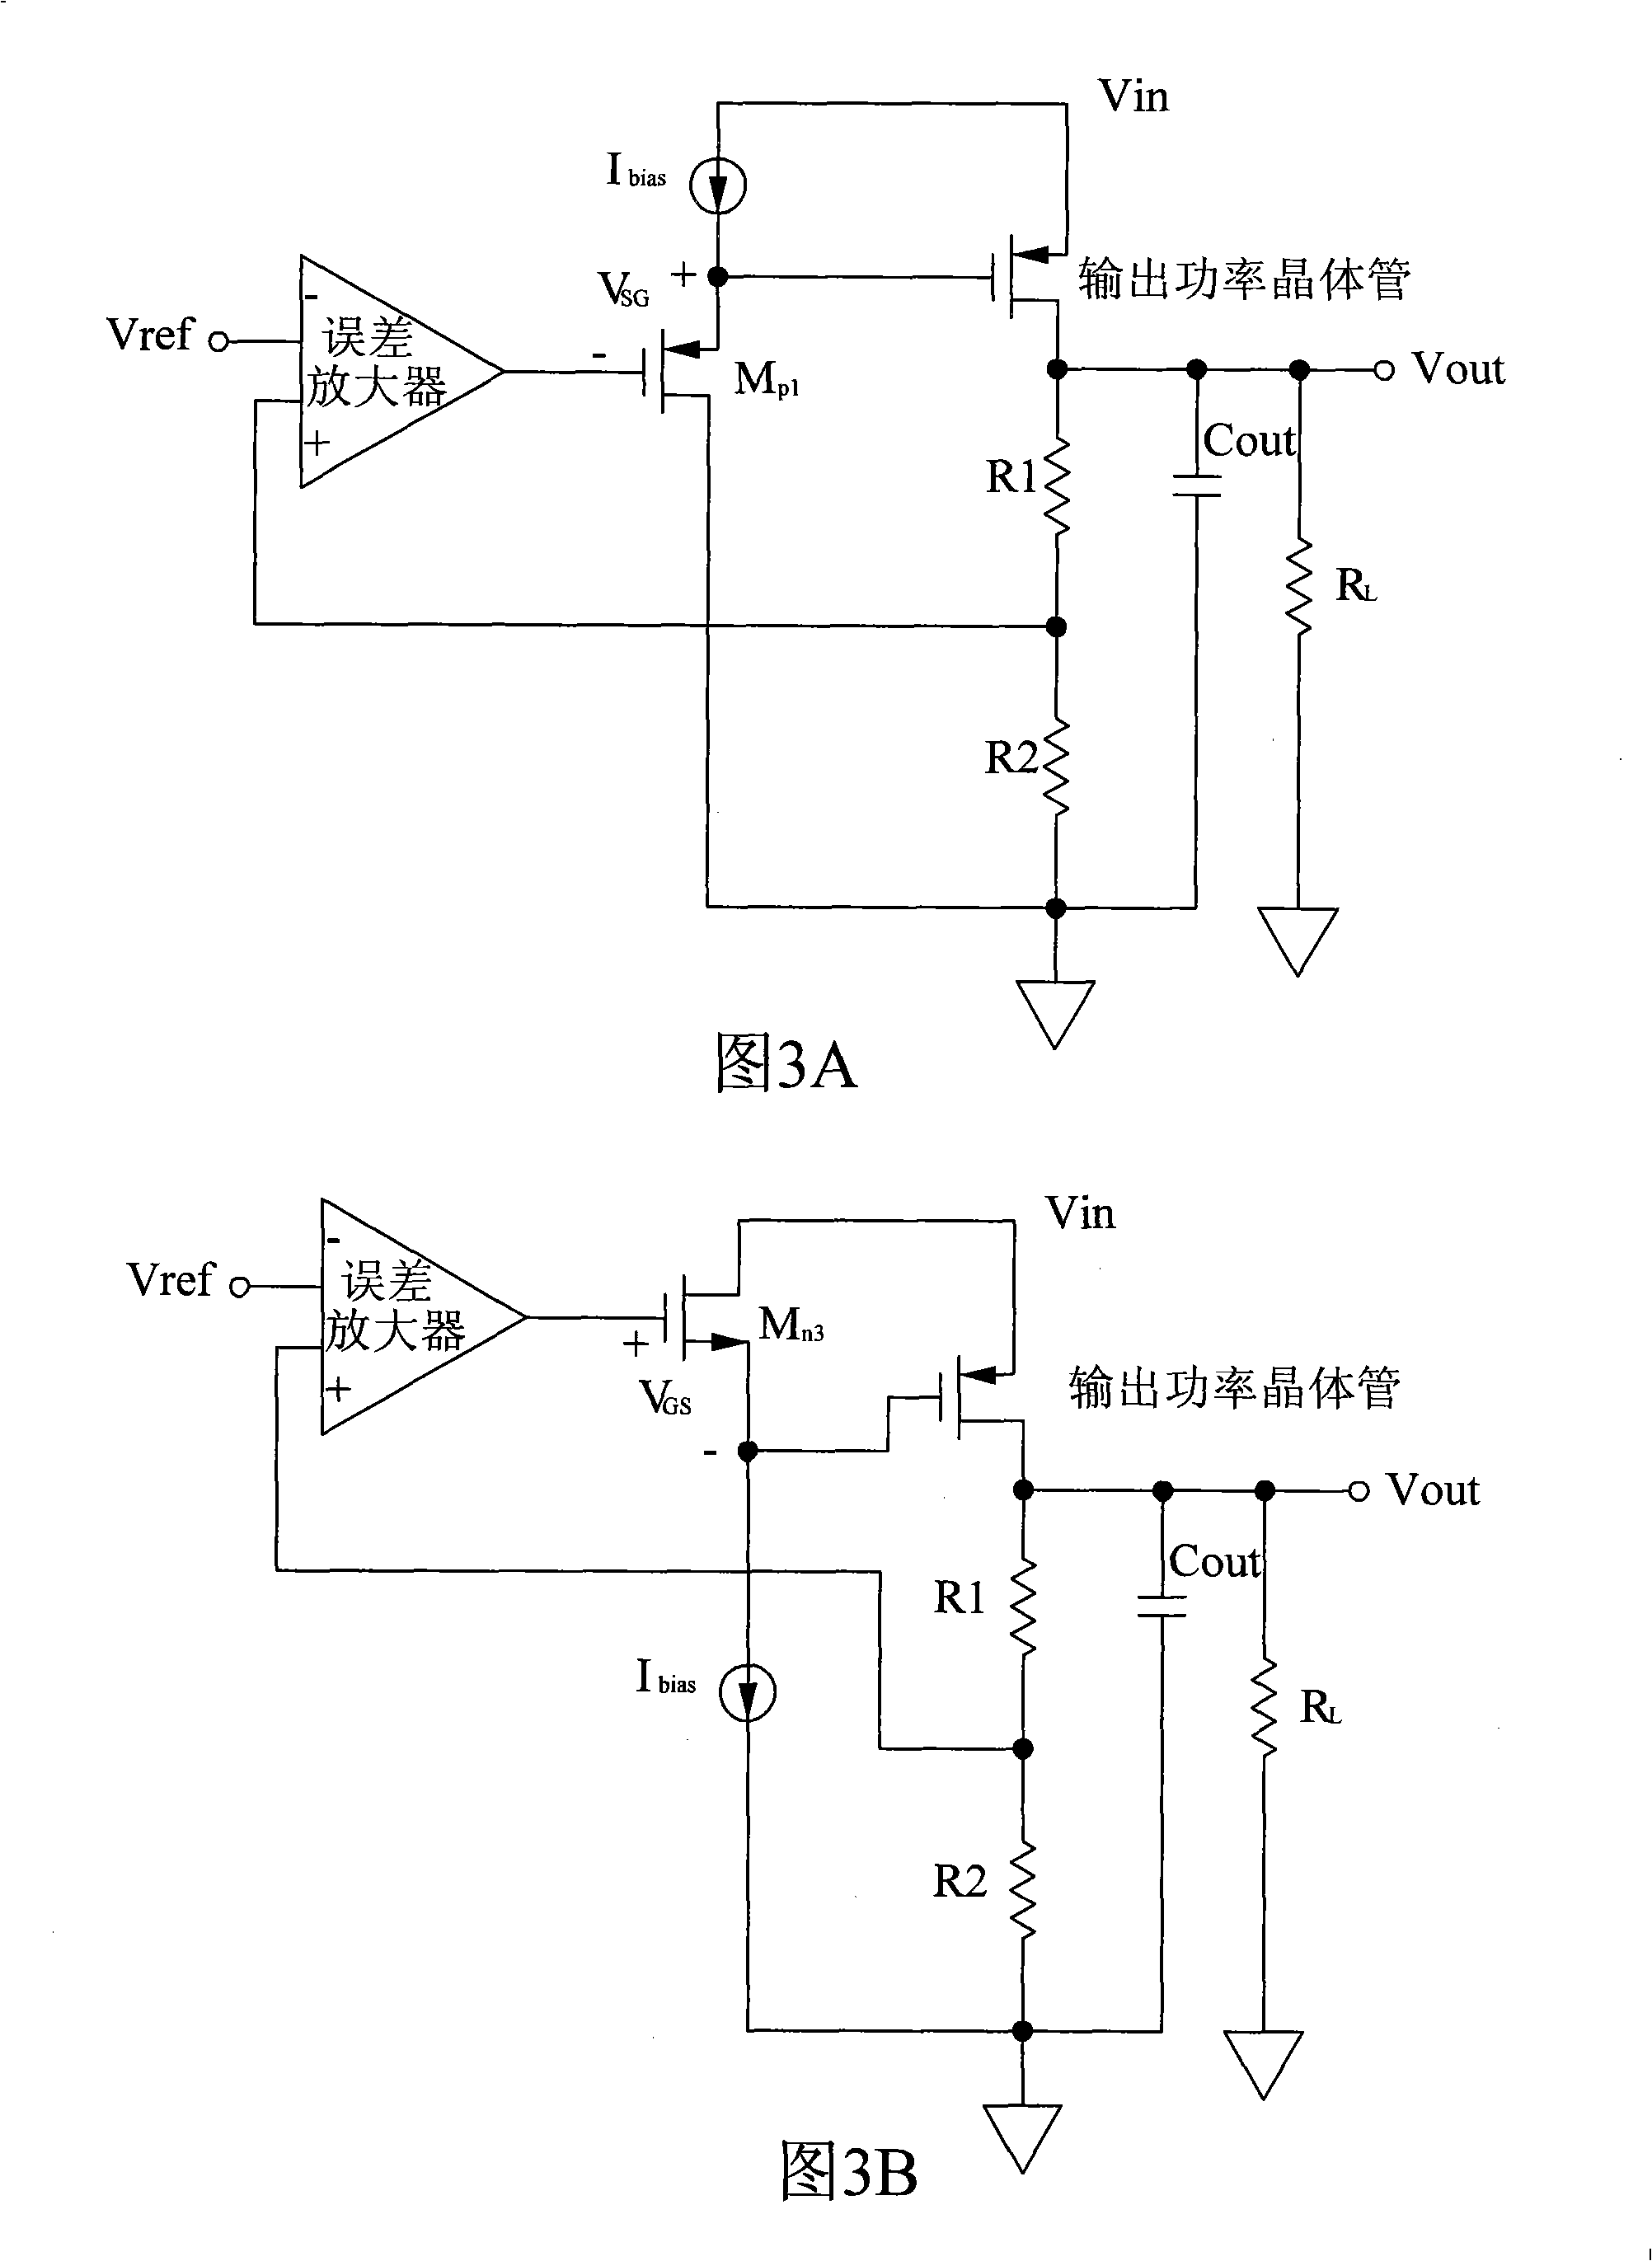 Low pressure drop voltage stabilizer for enhancing linearity and load regulation rate characteristic